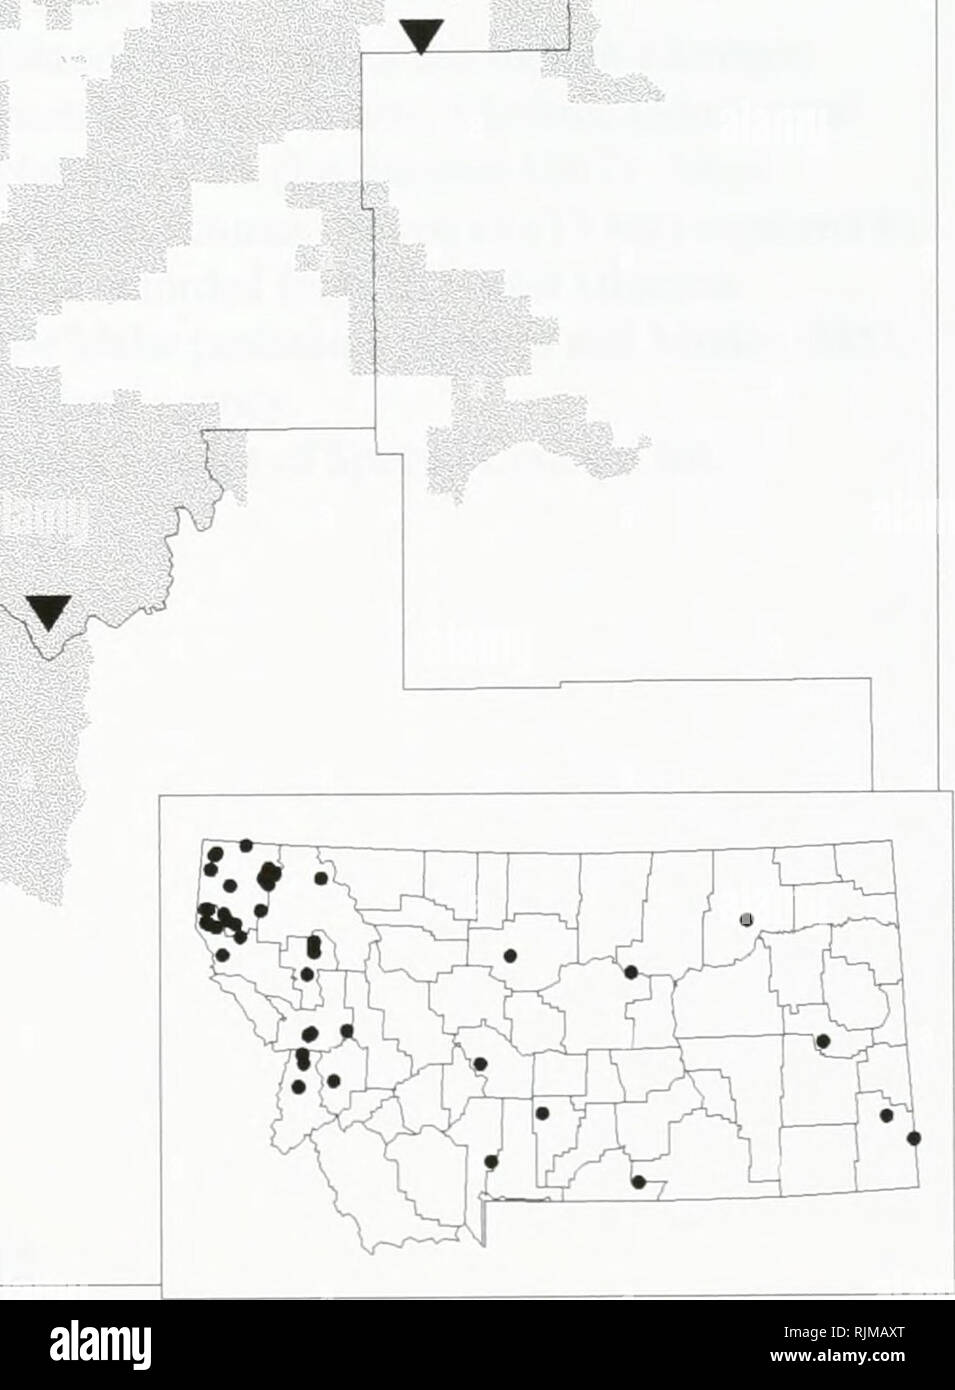 . Bat survey of the Kootenai National Forest, Montana : 1994 . Bats; Bats; Bats; Bats; Bats; Anabat bat detection systems; Bats; Bats; Long-eared myotis; Western small-footed myotis; Long-legged myotis; Big brown bat; Silver-haired bat; Hoary bat; Plecotus townsendii; Myotis yumanensis; Little brown bat; Myotis californicus; Mist netting; Mixed conifer forest. Lasionycteris noctivagans -- Silver-haired Bat Occurrences on or near the Kootenai National Forest, Montana T.;r^' ? 1994 data • 1993 data ^ Pre-1993 data &gt;Y&lt; Museum specimens ( T V, n. Species locations from the Montana Natural He Stock Photo